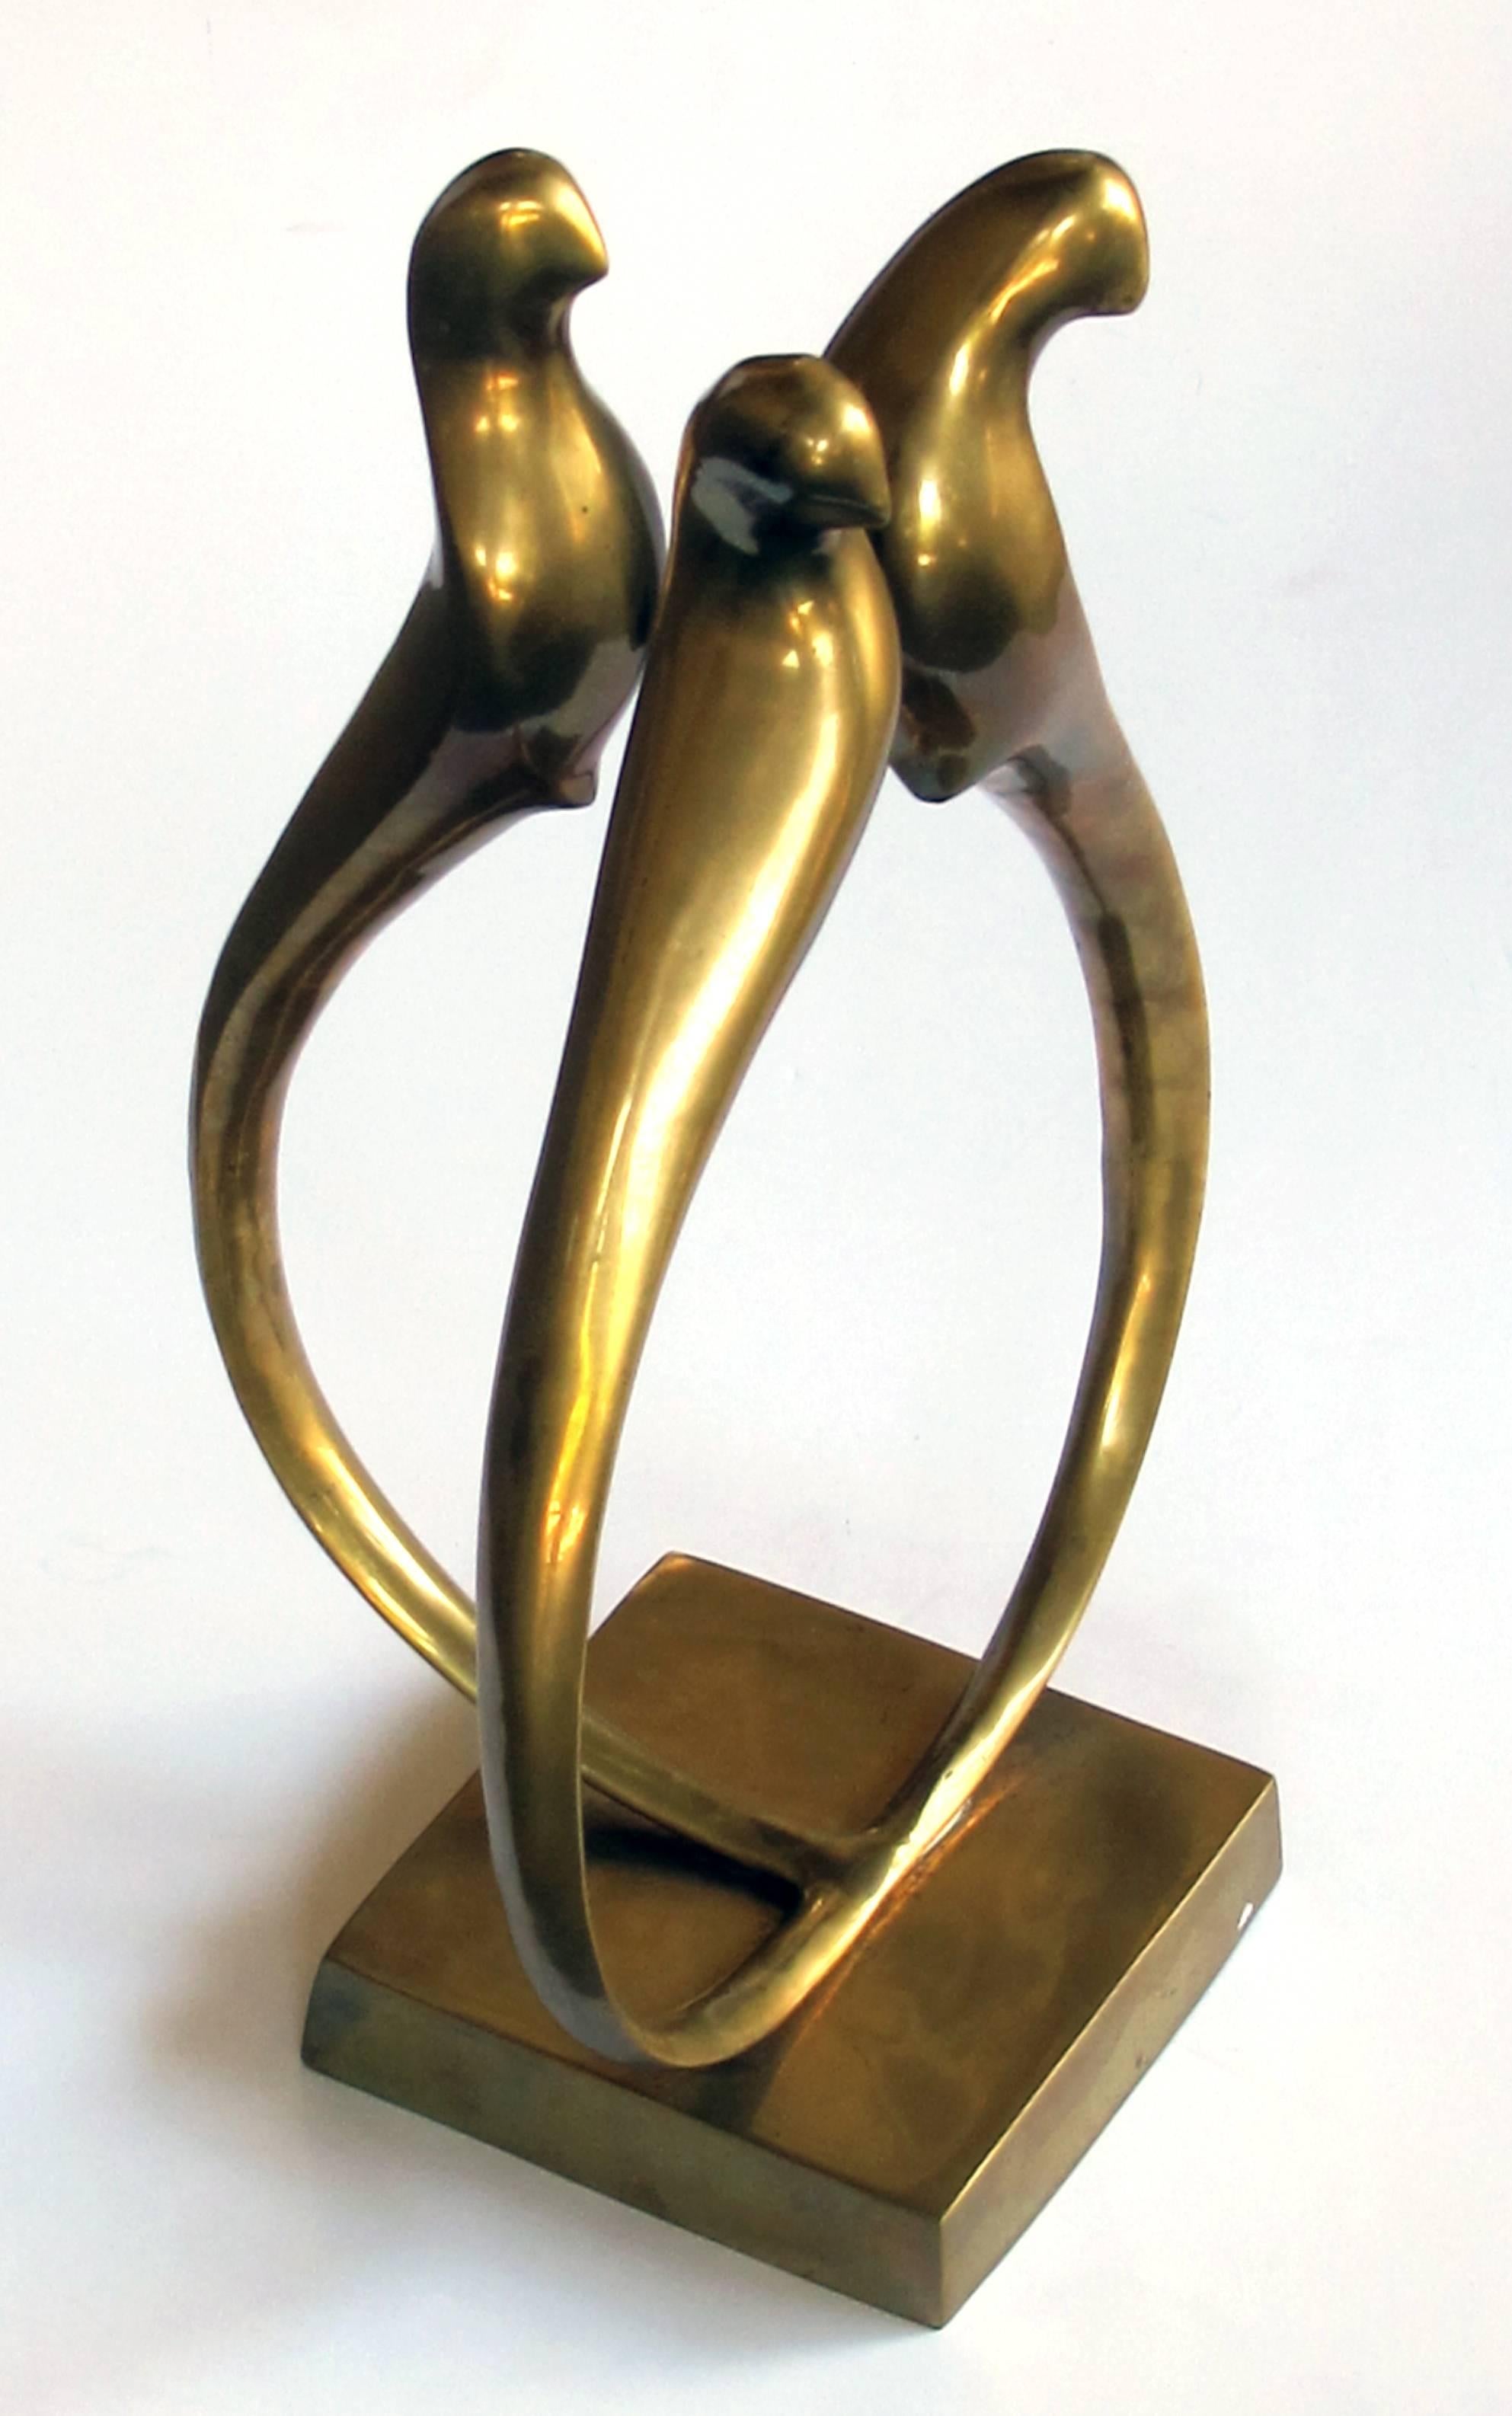 An elegant modeled Italian 1960s brass sculpture of three stylized birds with long tails; the shapely figure depicting three clustered birds with expressively-turned heads above long sweeping tails.